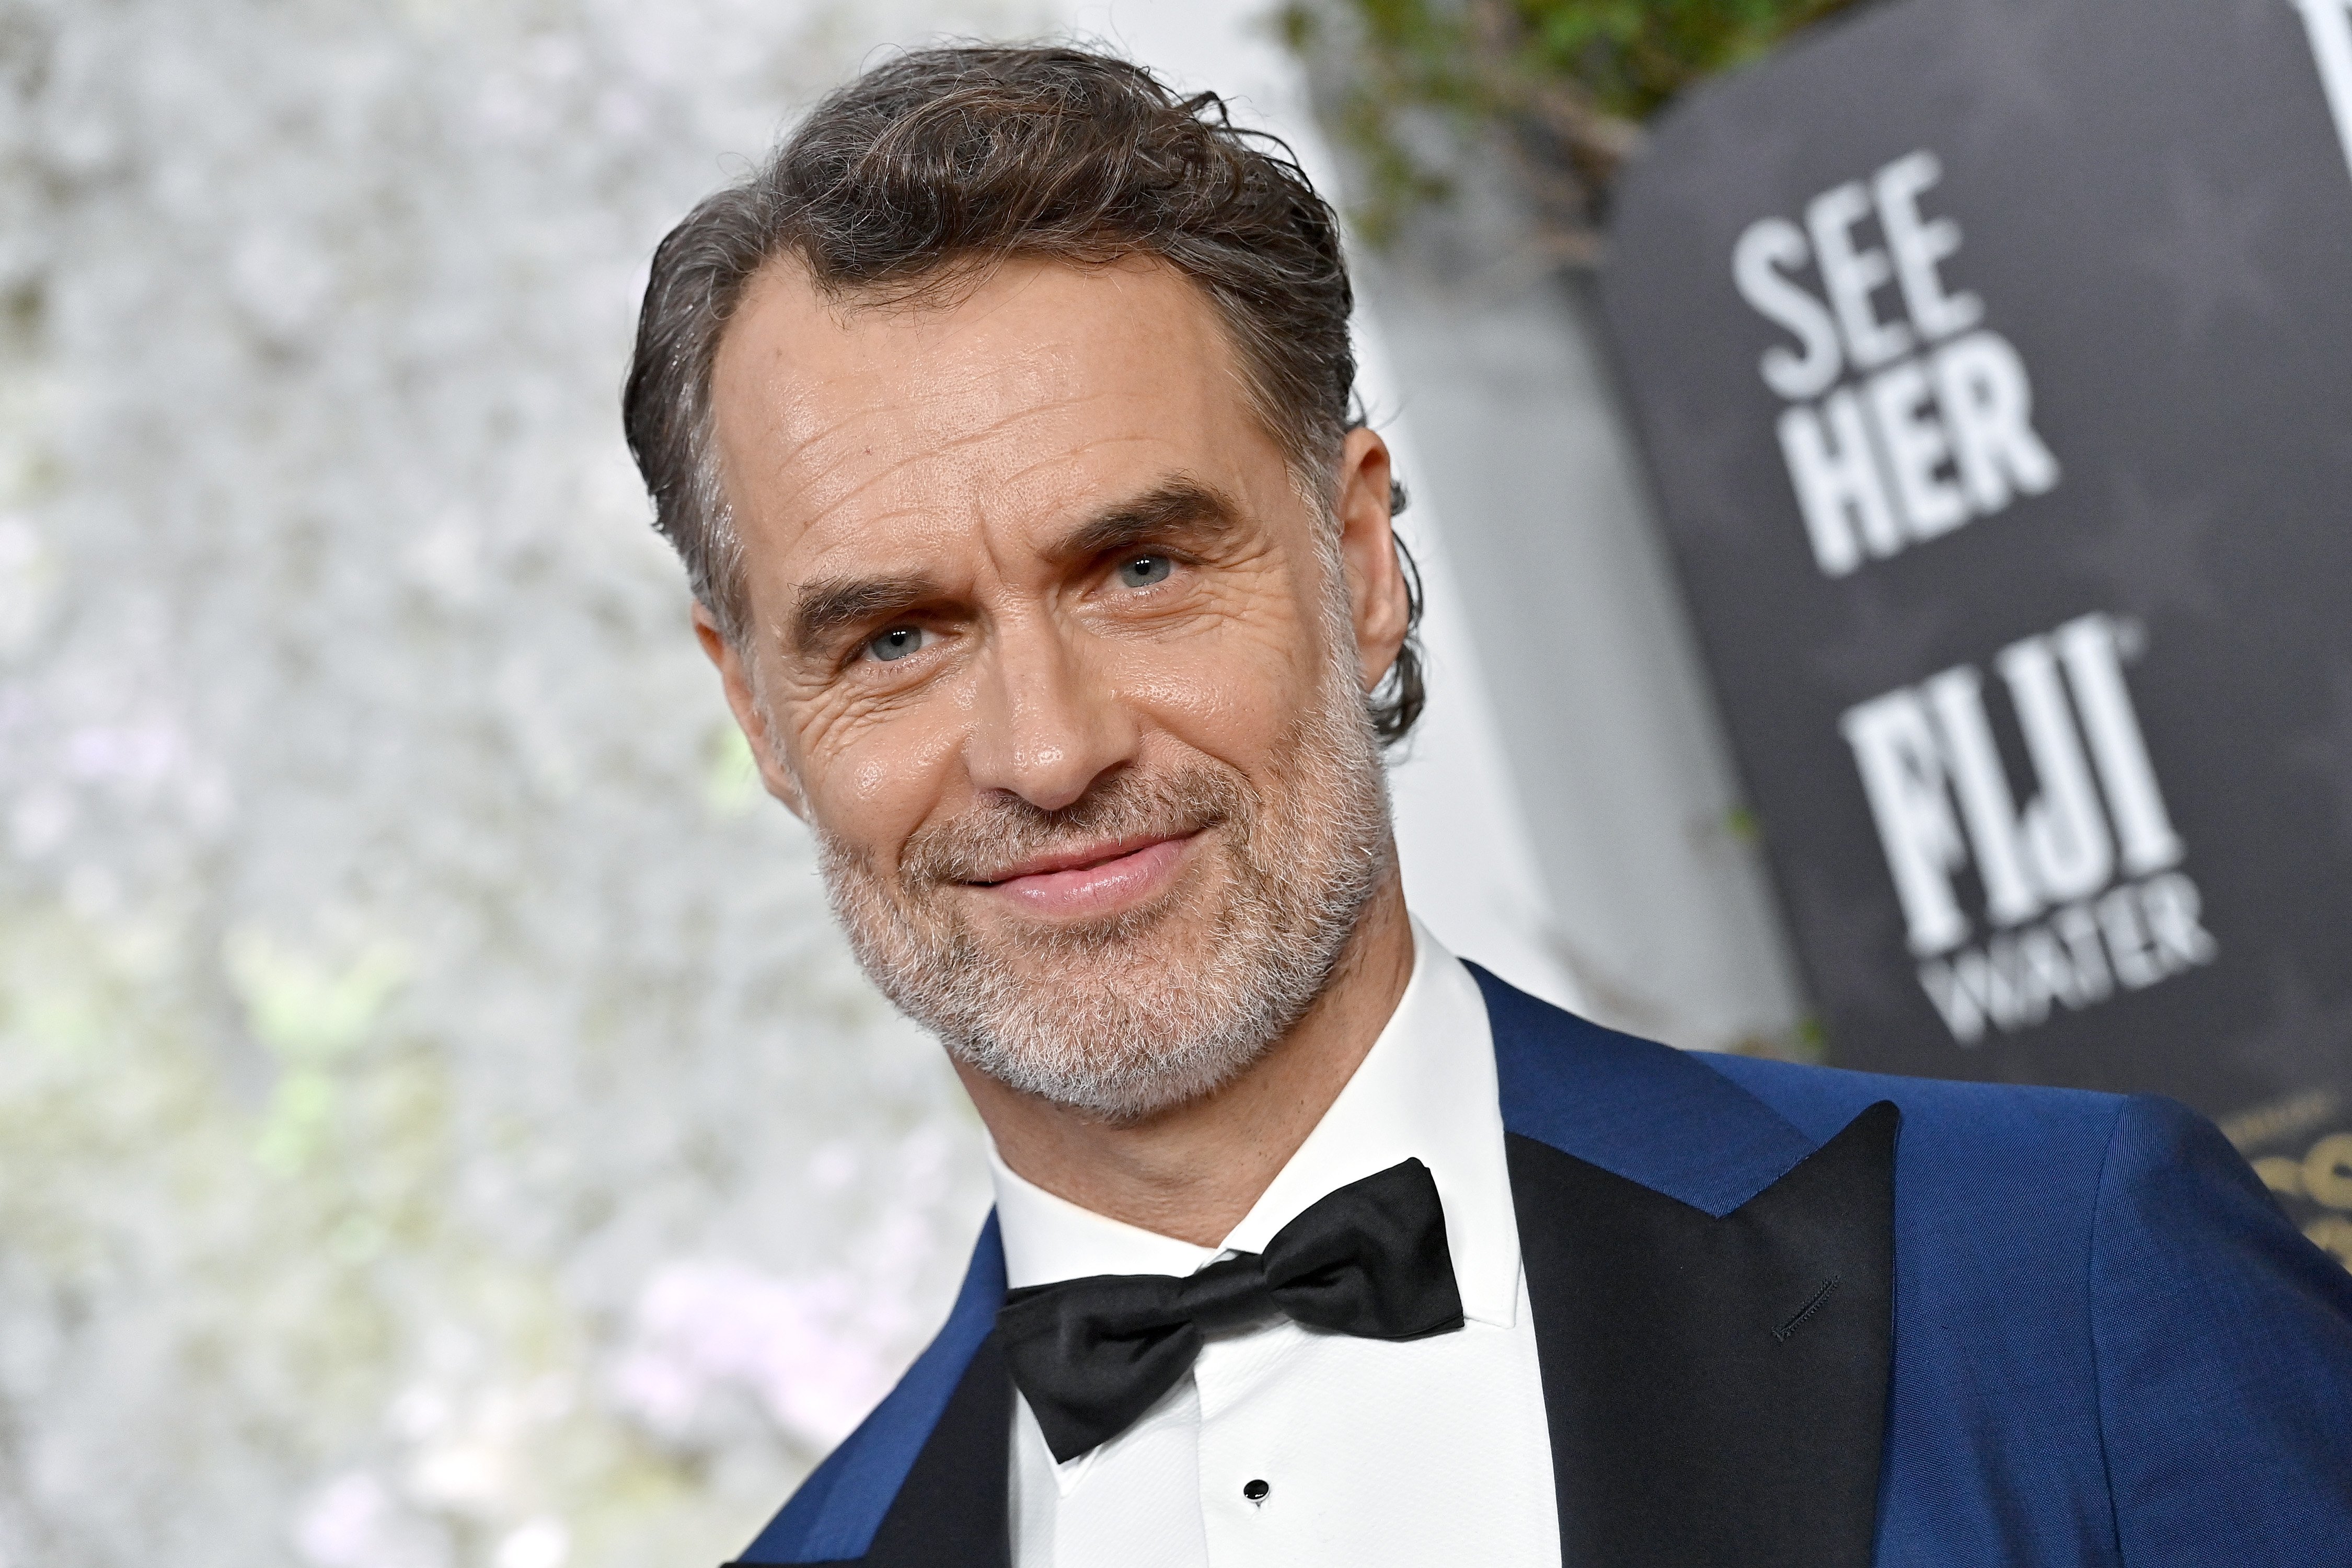 Murray Bartlett at Fairmont Century Plaza on January 15, 2023, in Los Angeles, California. | Source: Getty Images